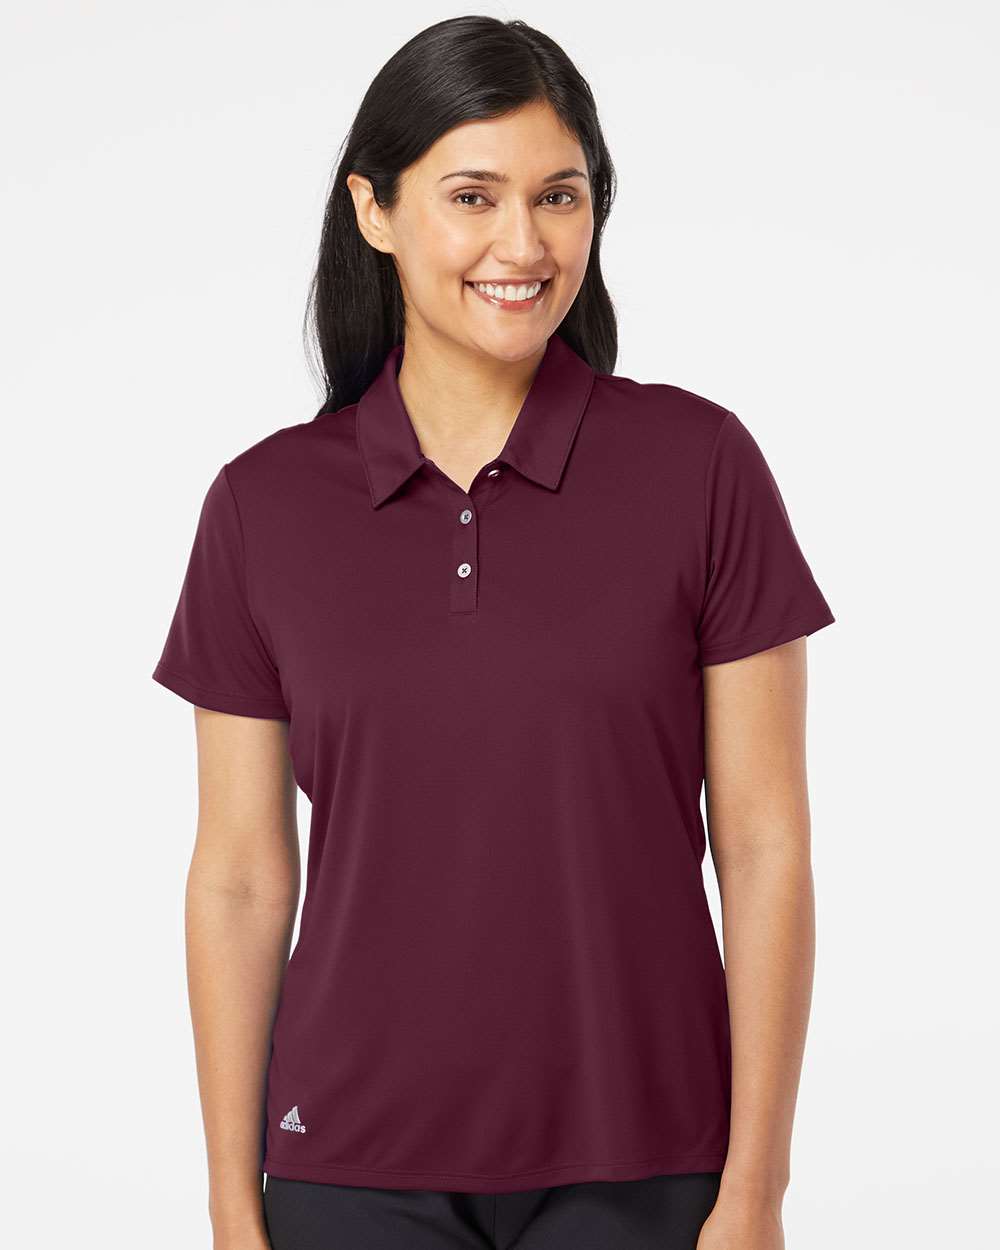 Adidas - Women's Performance Polo – InTandem Promotions